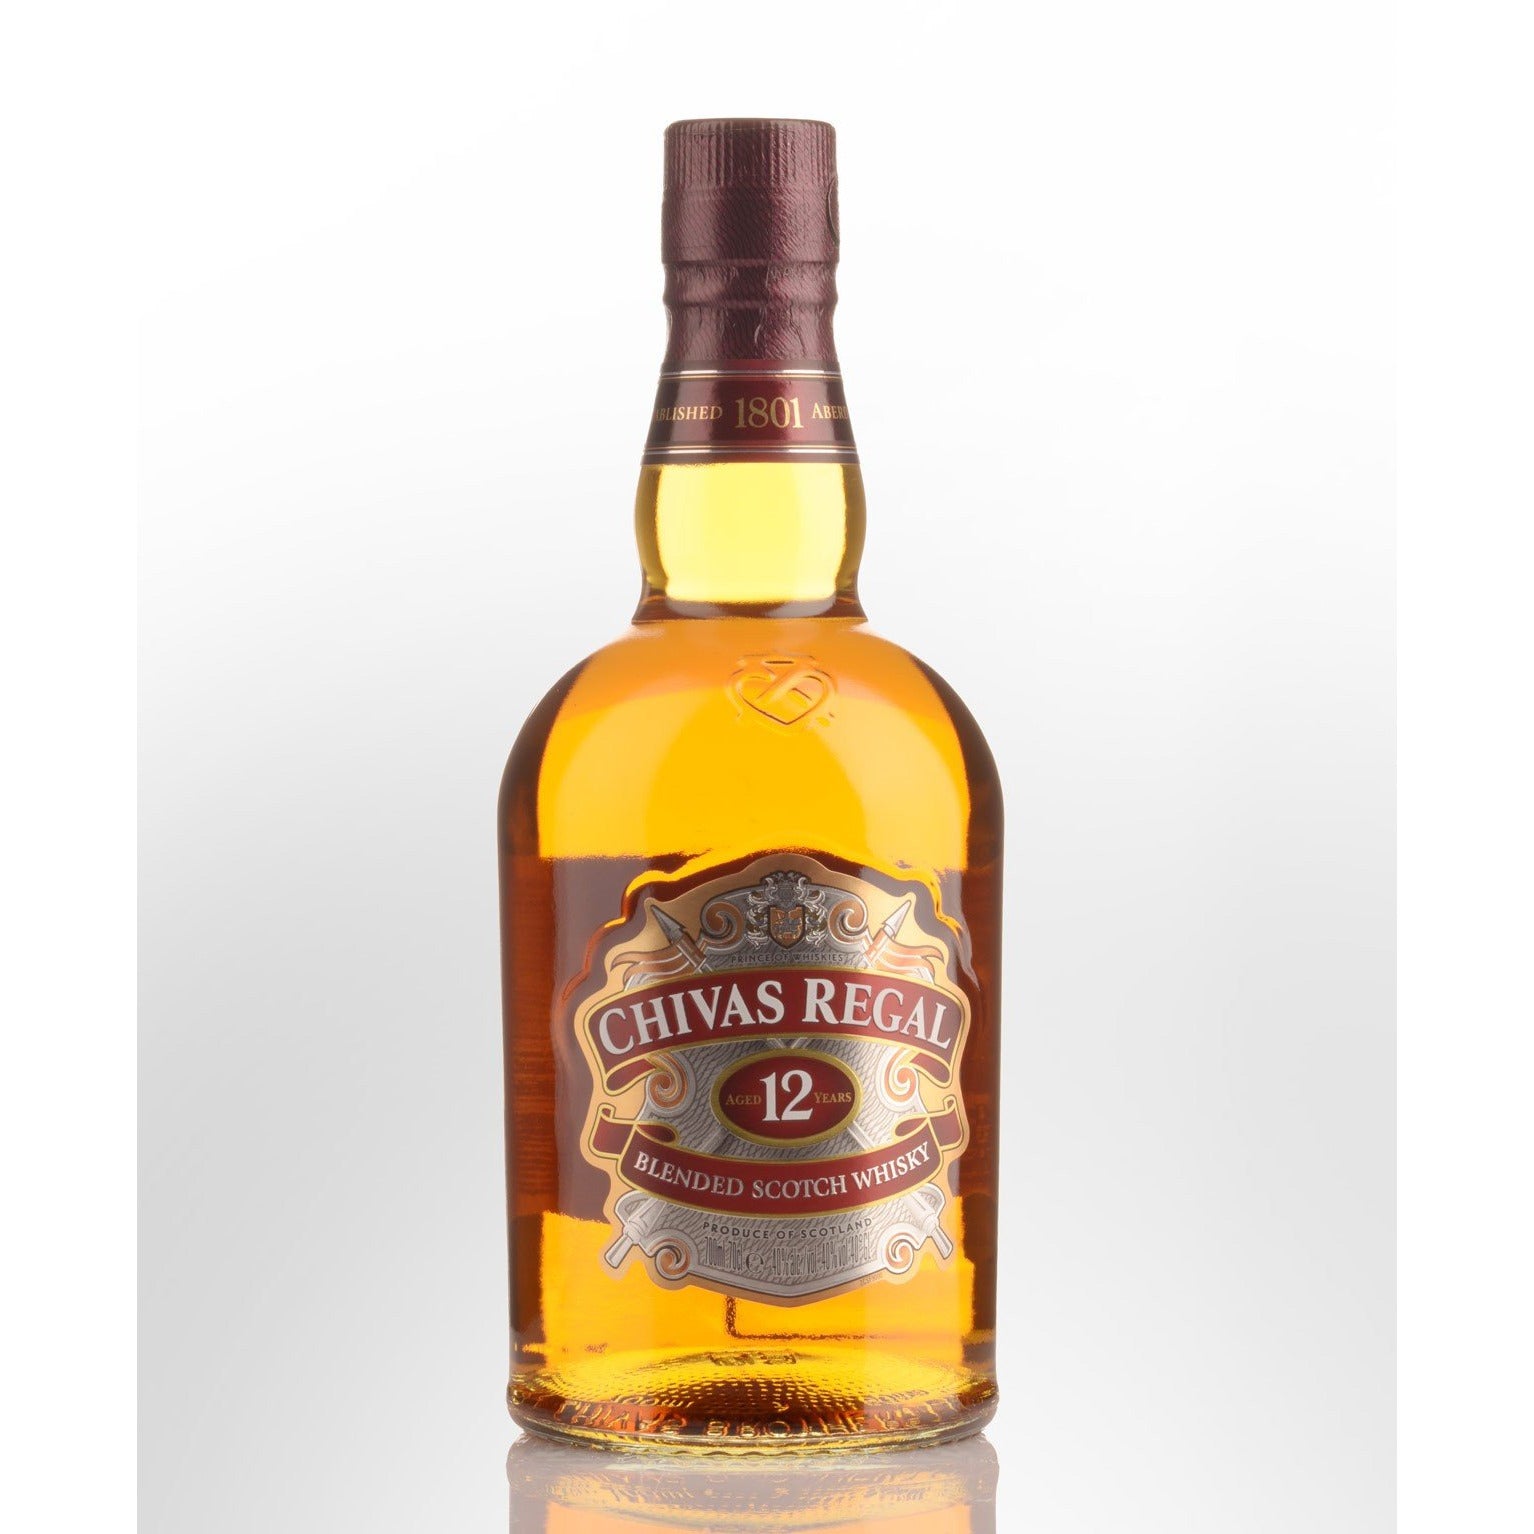 Chivas Regal 12 Year Old Blended Scotch Whisky 700mL